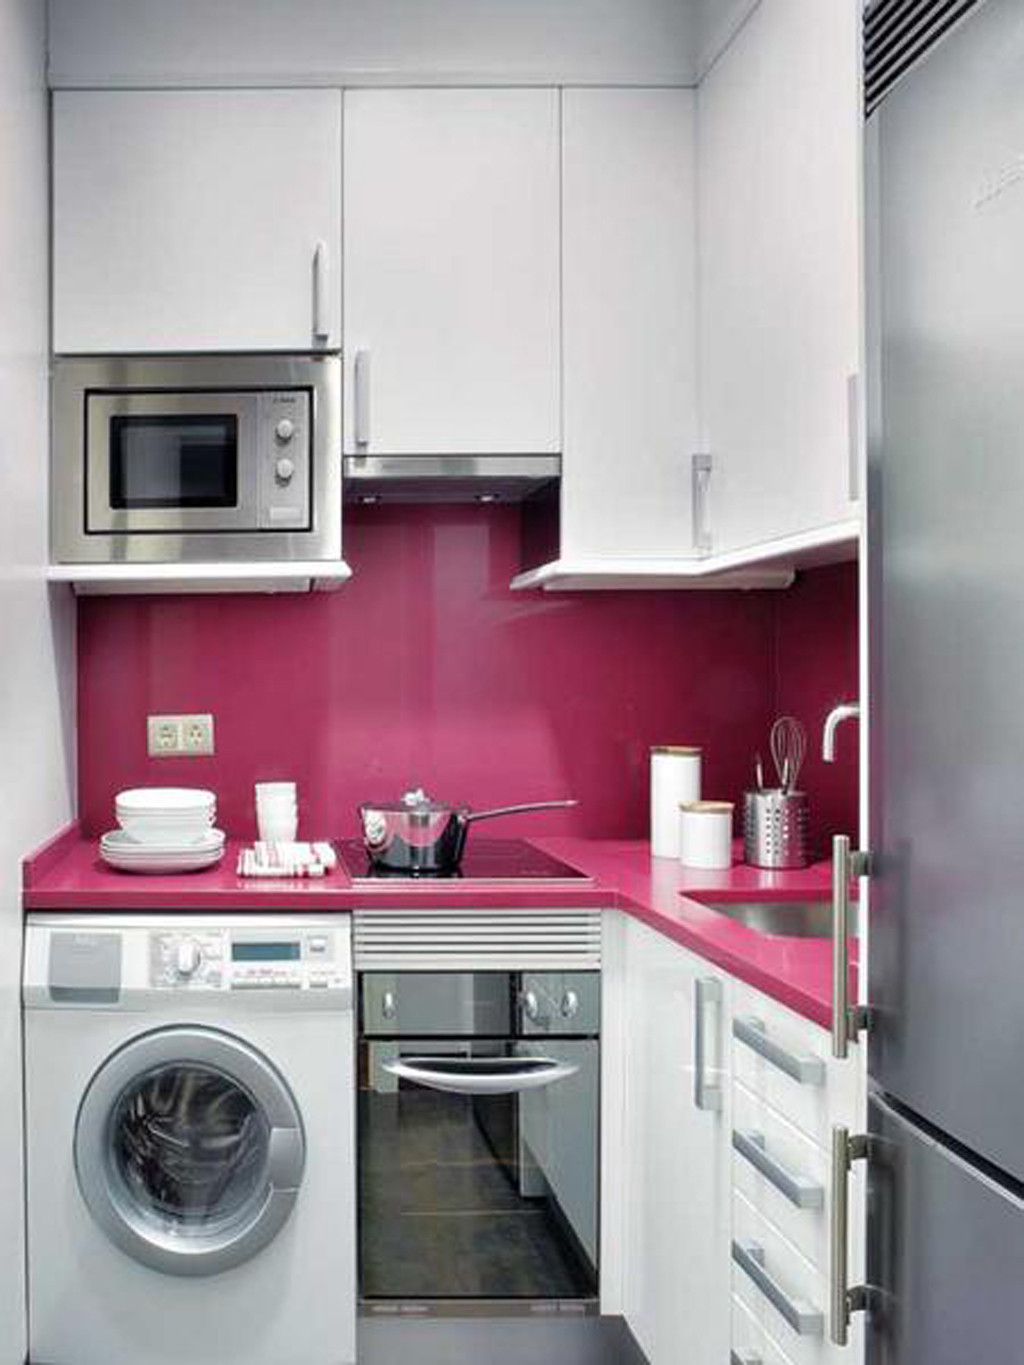 Appliances For Small Kitchen Spaces
 Space Saver Microwave for pact and Functional Kitchen